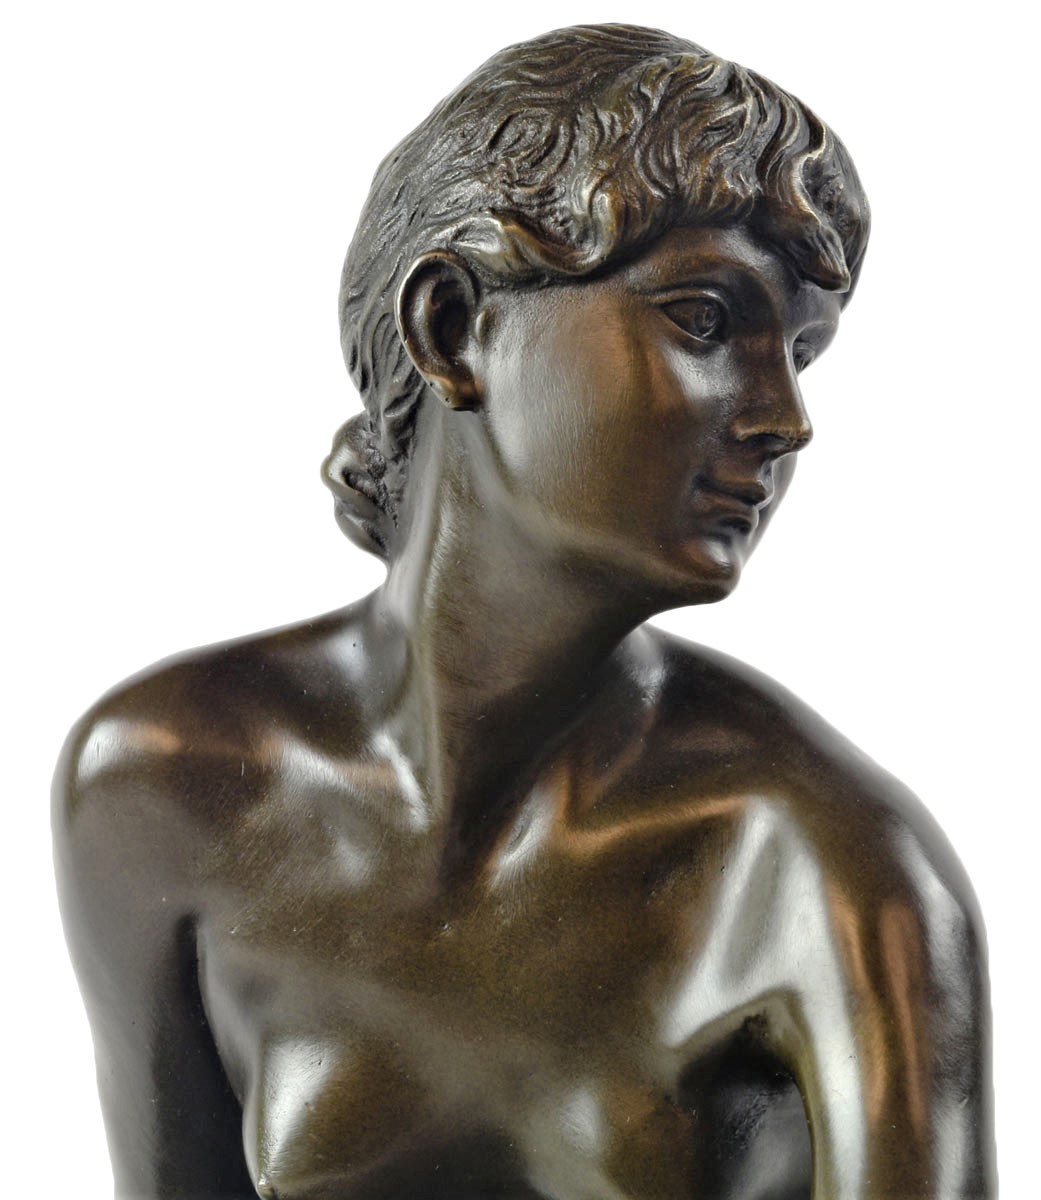 Dancing Lady Hot Cast Bronze Sculpture On Marble Base